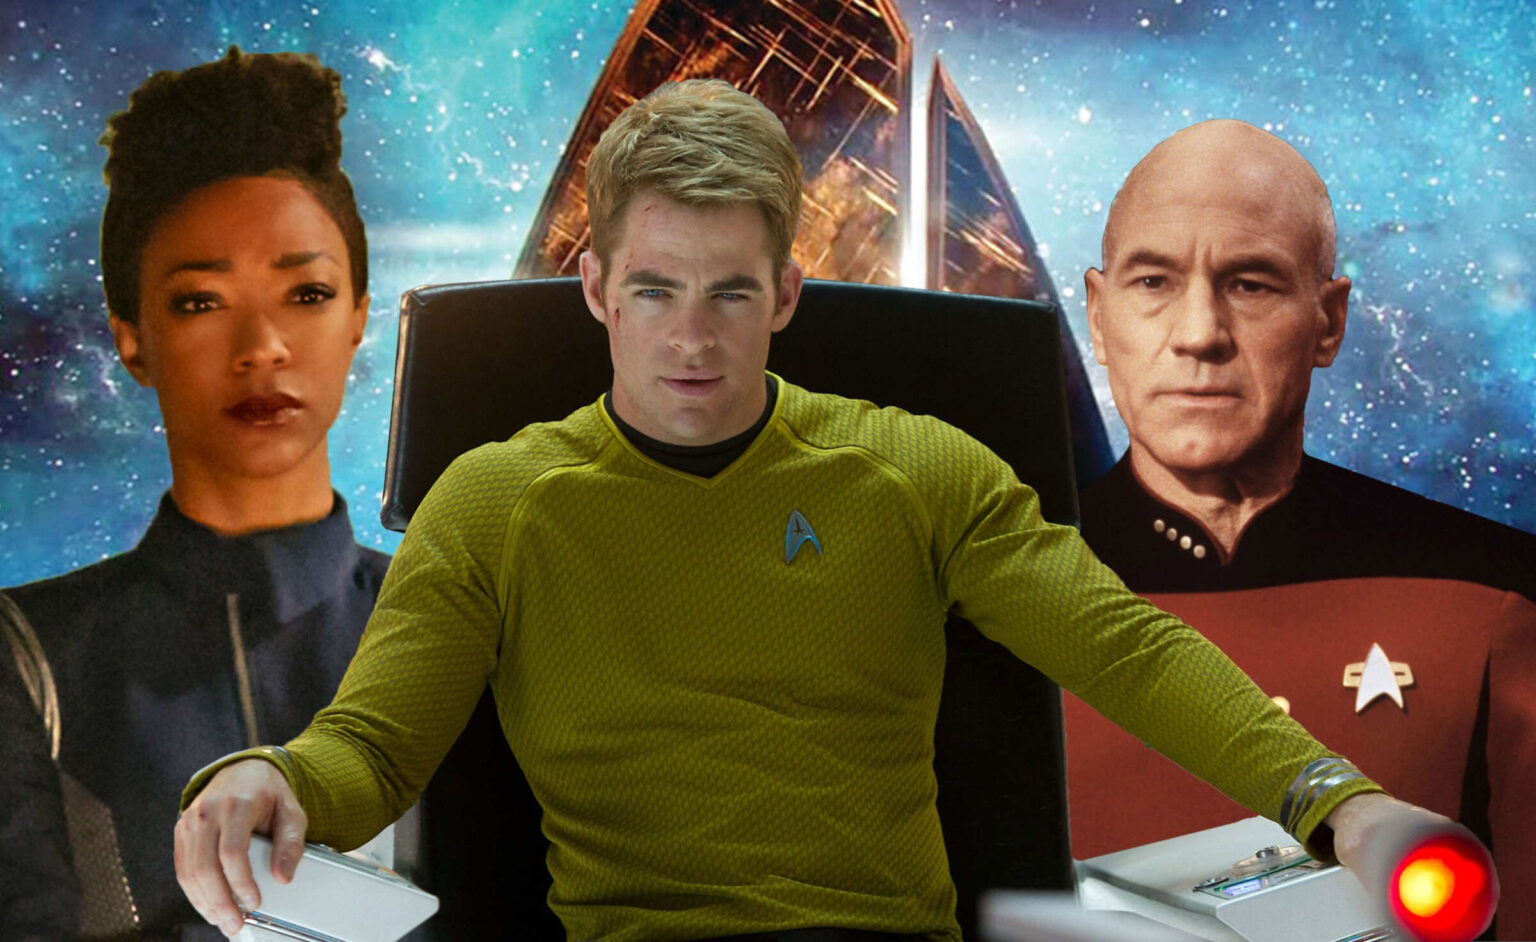 Is the new 'Star trek' movie going to have an original story? Don't get too disappointed if the filmmakers are, once again, going where we've gone before.